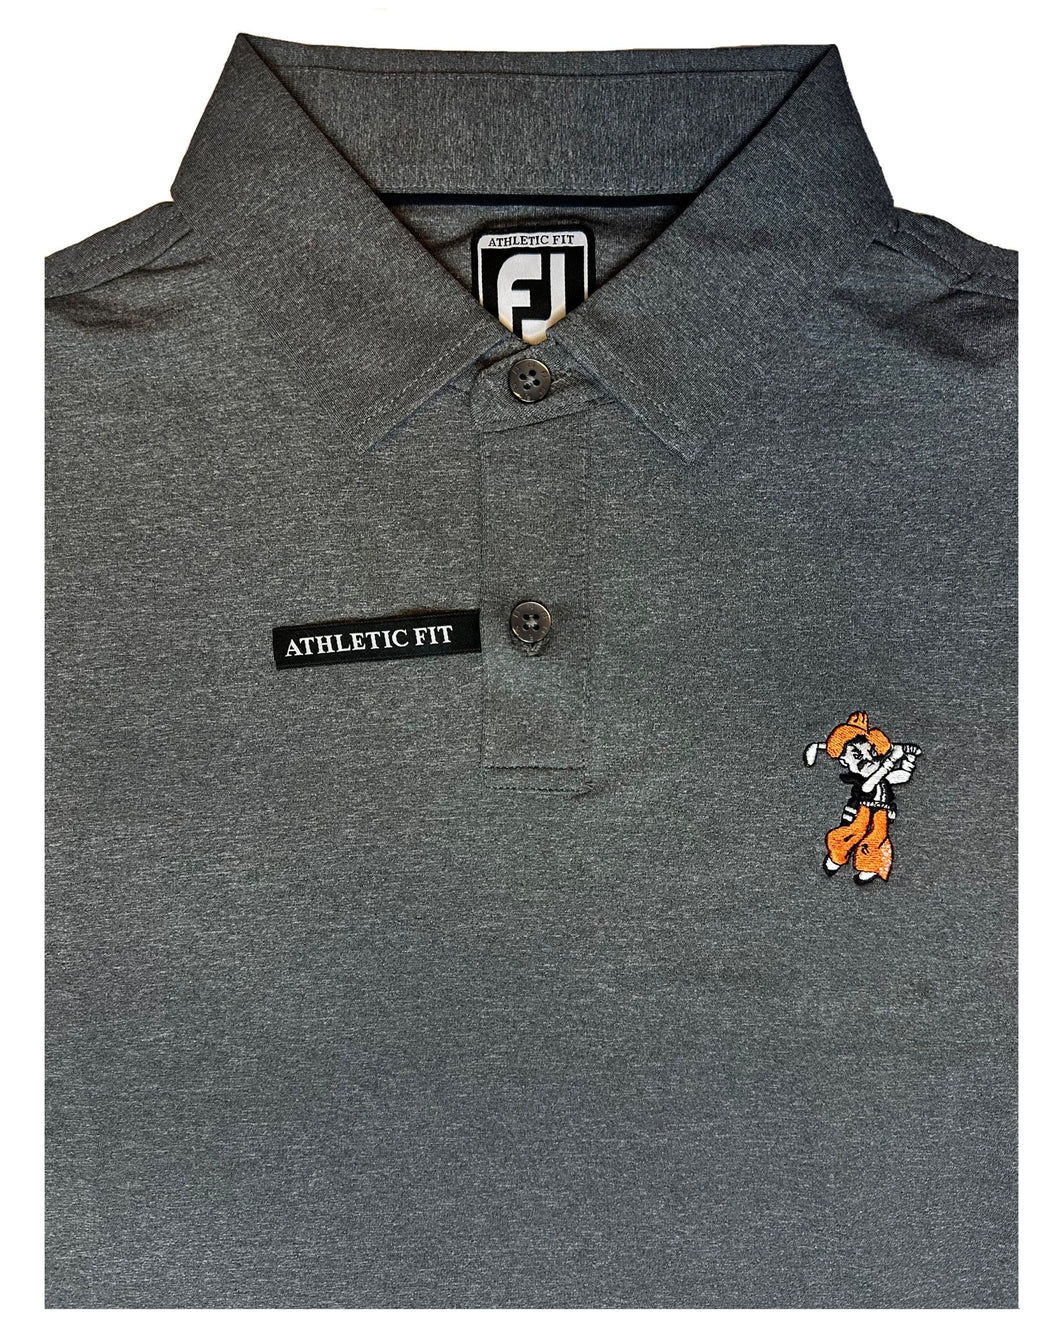 FootJoy Athletic Fit Solid Lisle Polo